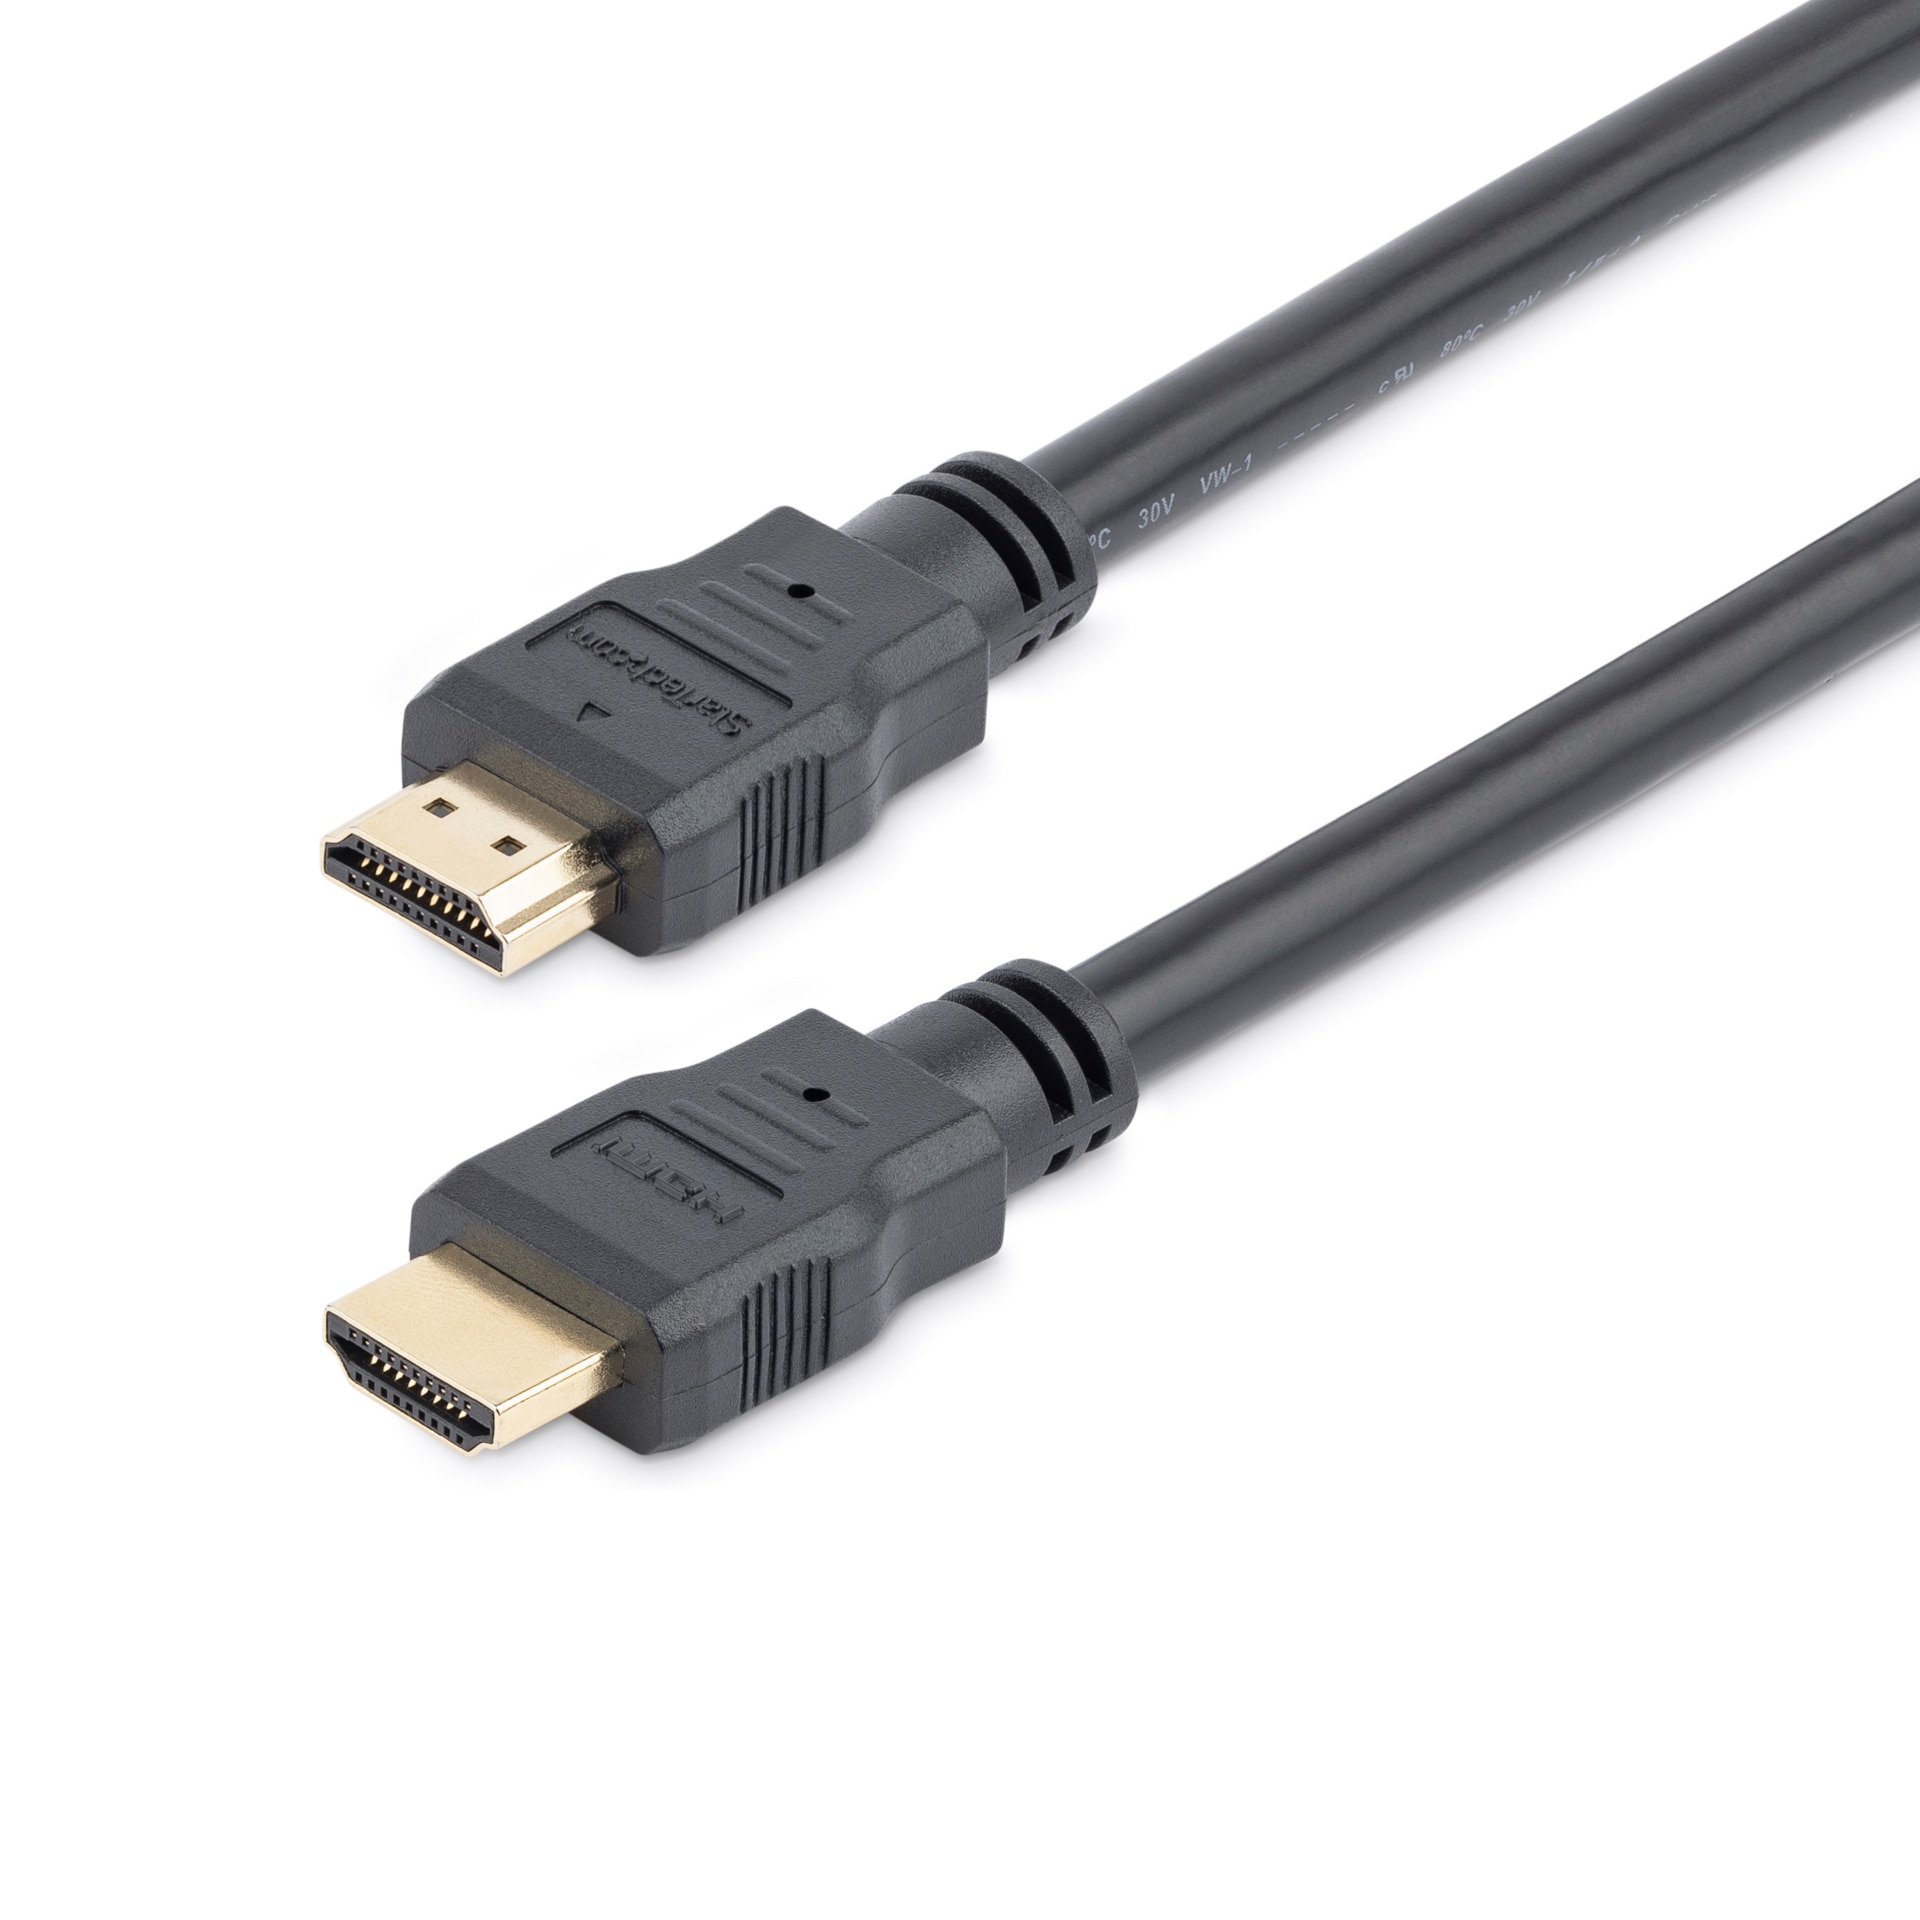 StarTech.com 16.4ft/5m HDMI Cable - 4K High Speed HDMI 1.4 Cable w/Ethernet - UHD HDMI Monitor Cord